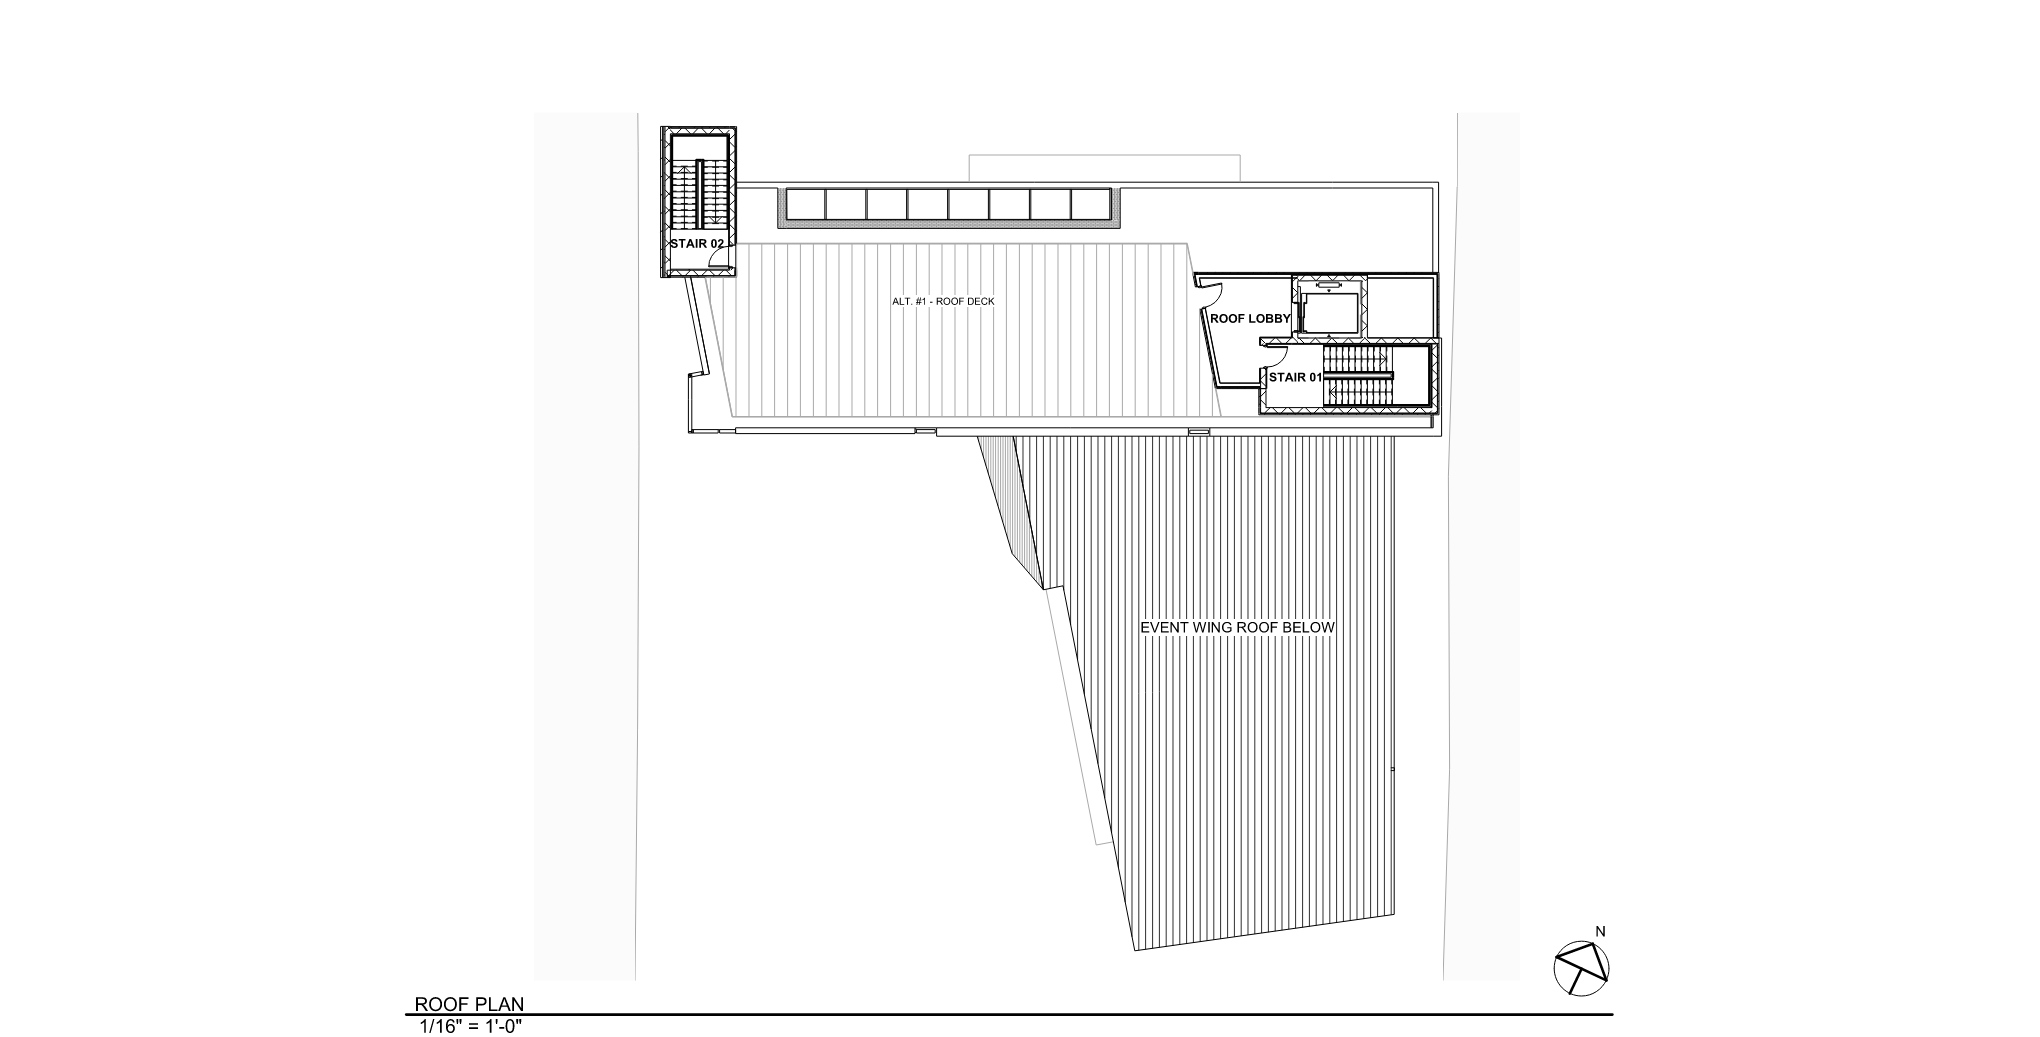 CA_History & Culture Center_FLOOR PLANS Page 005.png